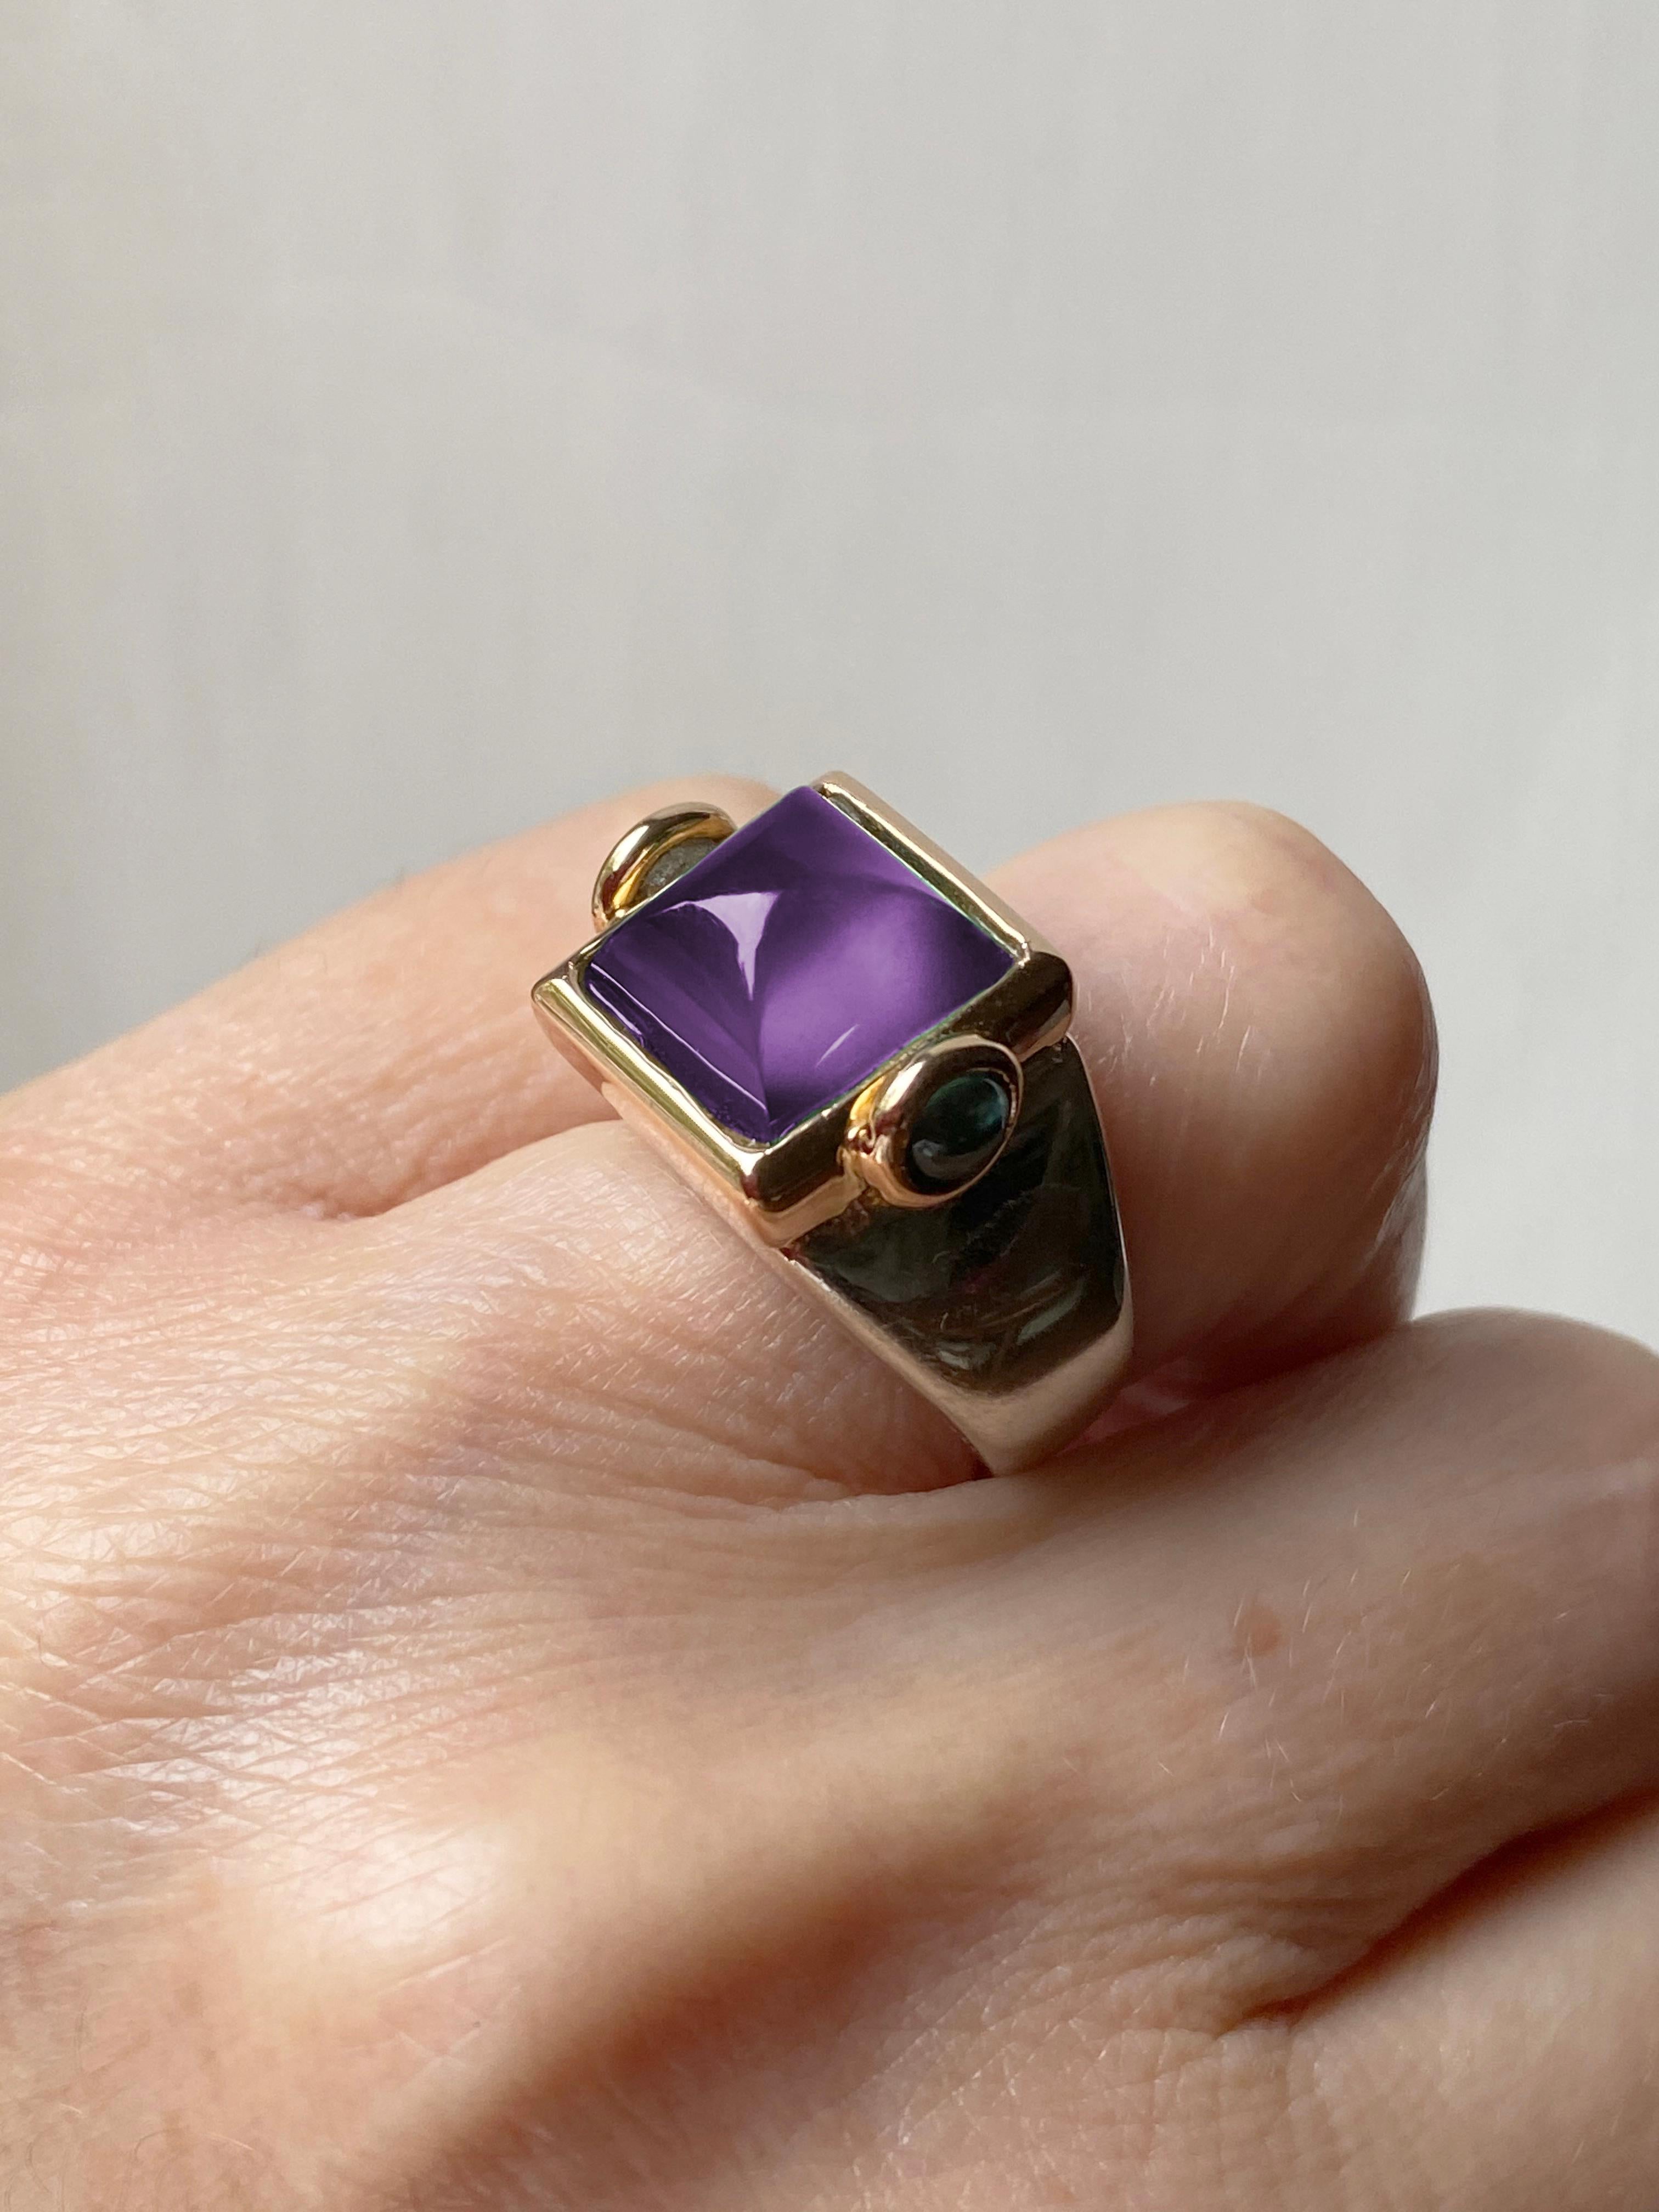 Introducing Rossella Ugolini's captivating design collection, meticulously handcrafted in Platinum and 18K Yellow Gold, featuring a striking Pyramid Cut Amethyst accented by two cabochon Green Tourmalines. This exceptional craftsmanship, originating